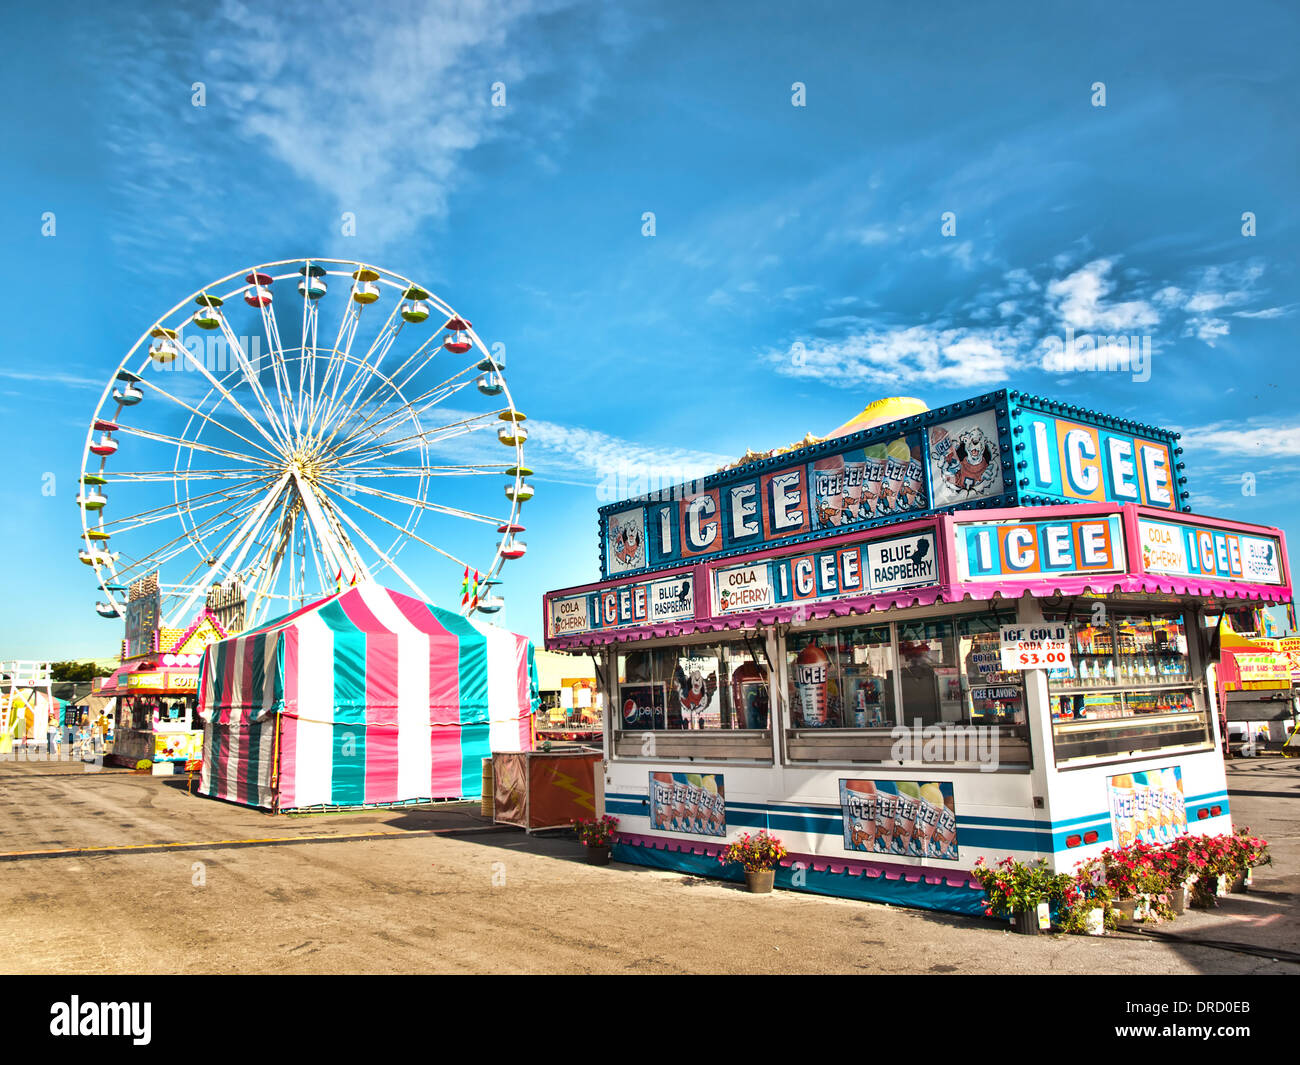 Syracuse, New York, USA. August-26-2013. Midway at the New York State Fair Stock Photo